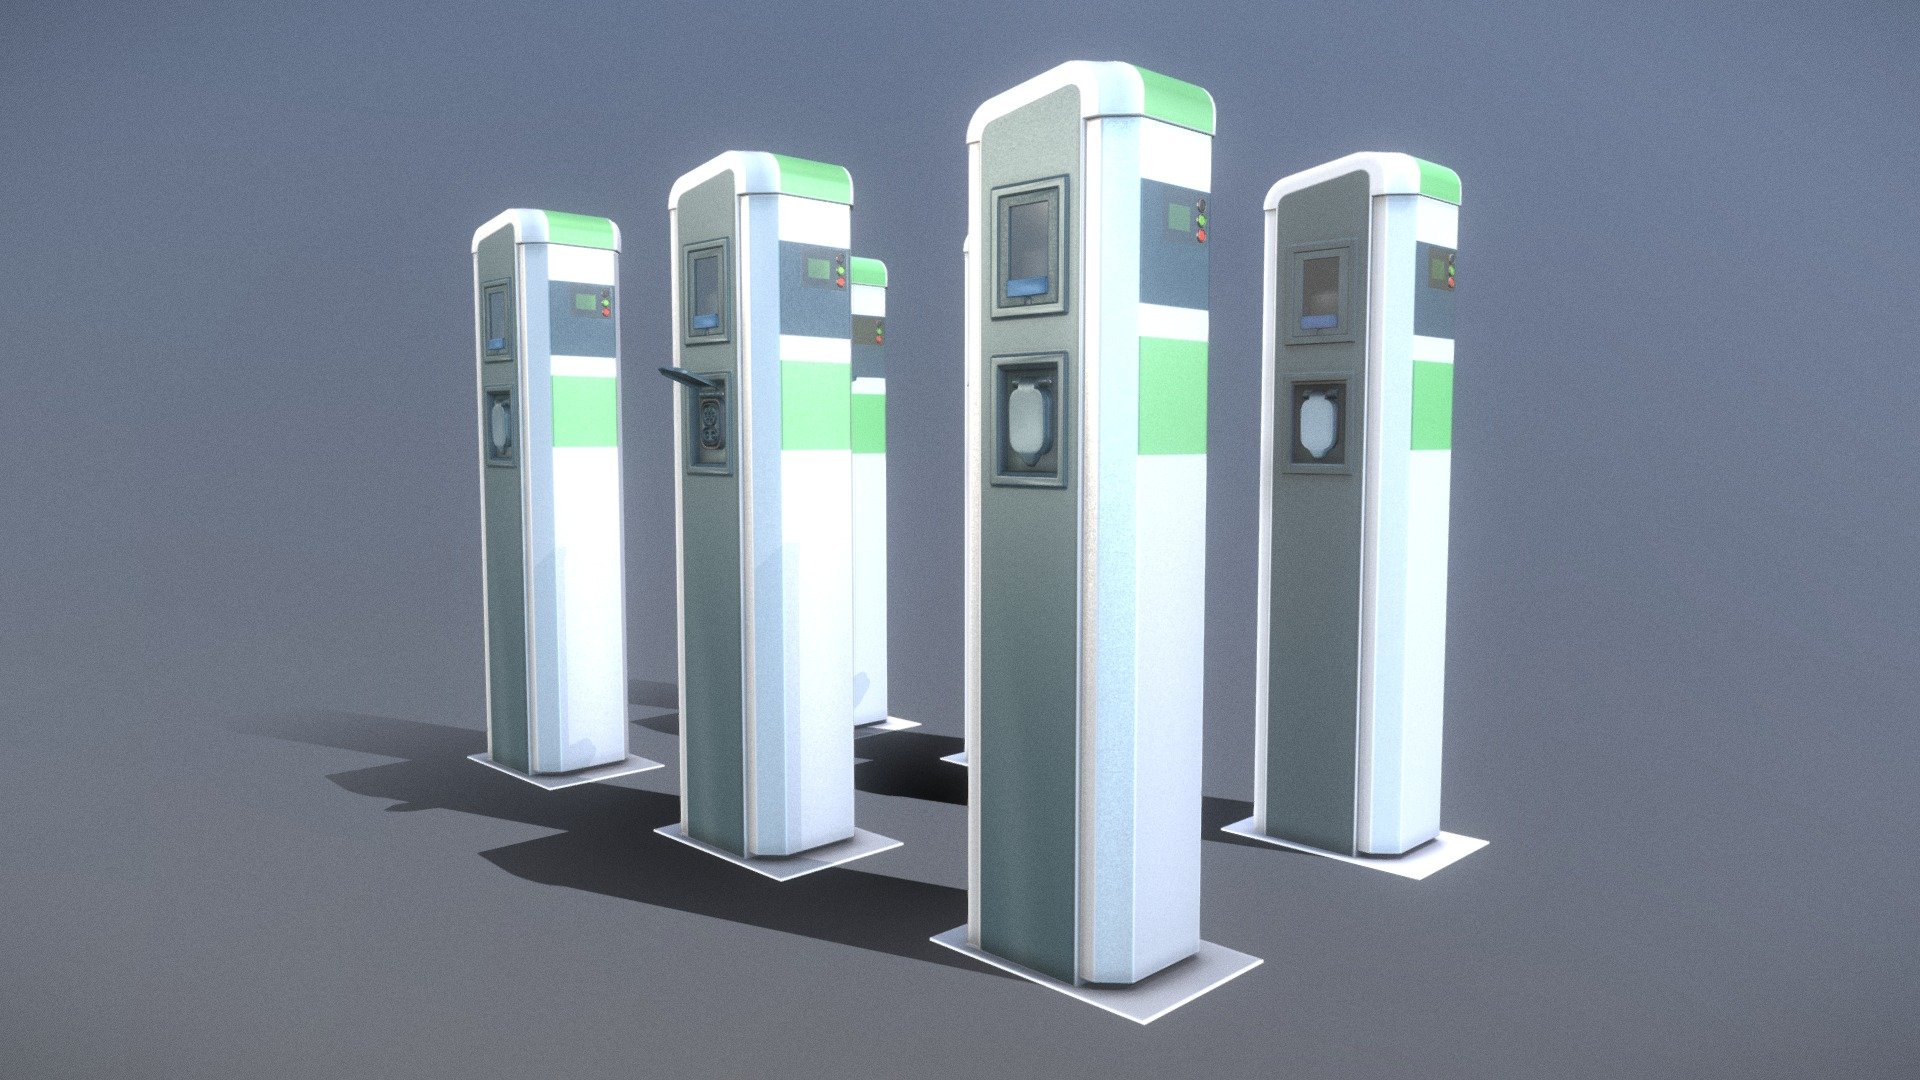 Electric Vehicle Charging Station 1 LowPoly 3D Model